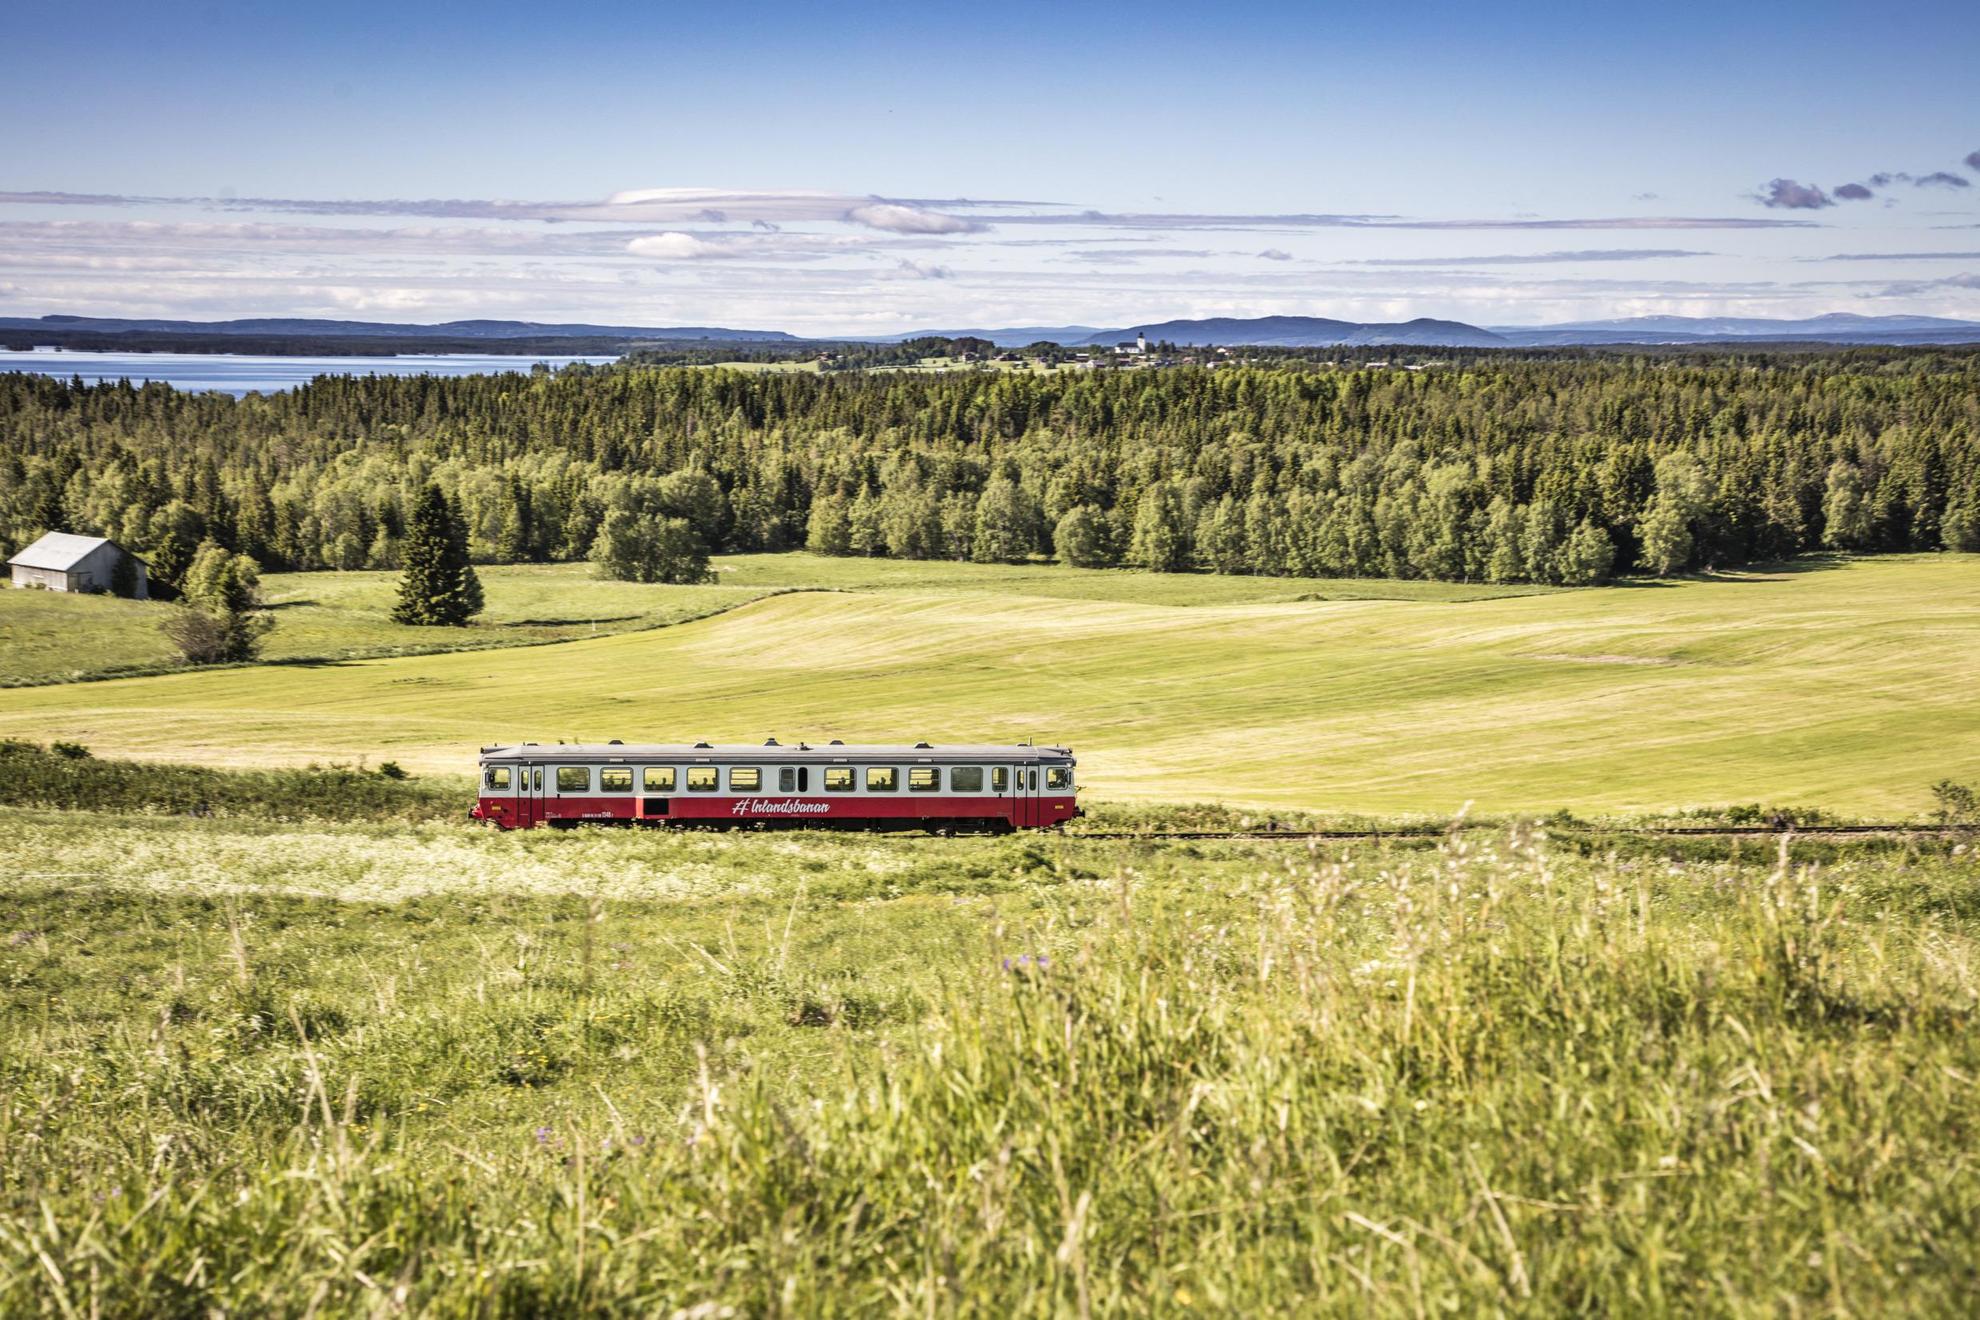 A train passing through a landscape of fields, forests, water and mountains.